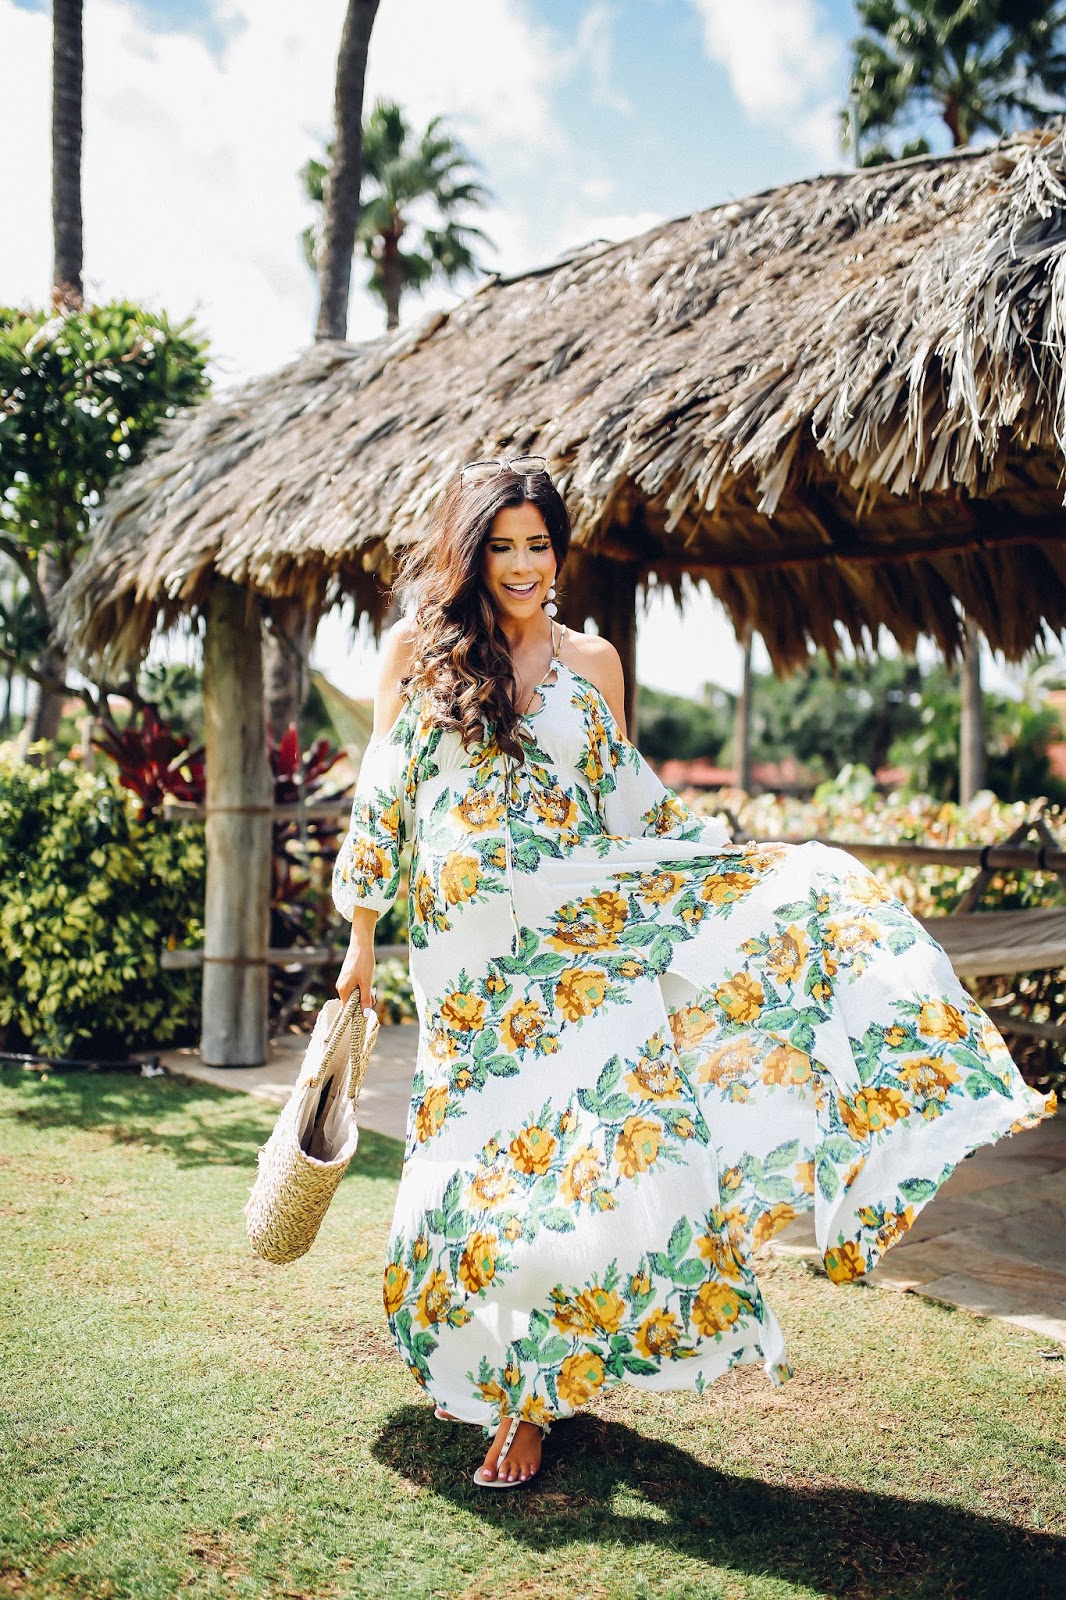 Floral Maxi Dress in Maui | The Sweetest Thing